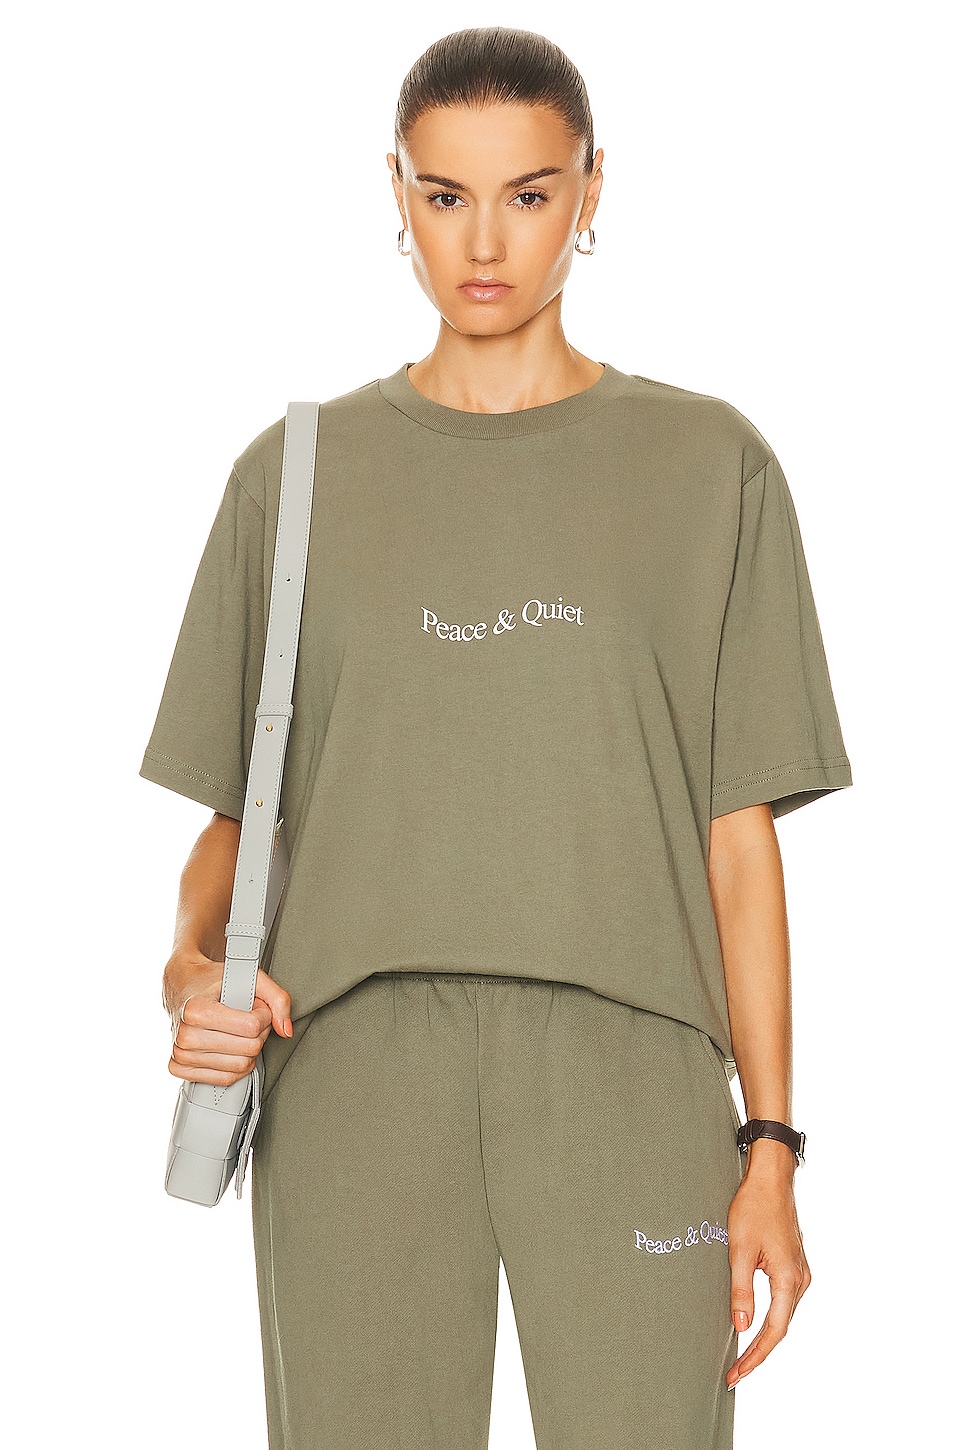 Image 1 of Museum of Peace and Quiet Wordmark T-shirt in Olive